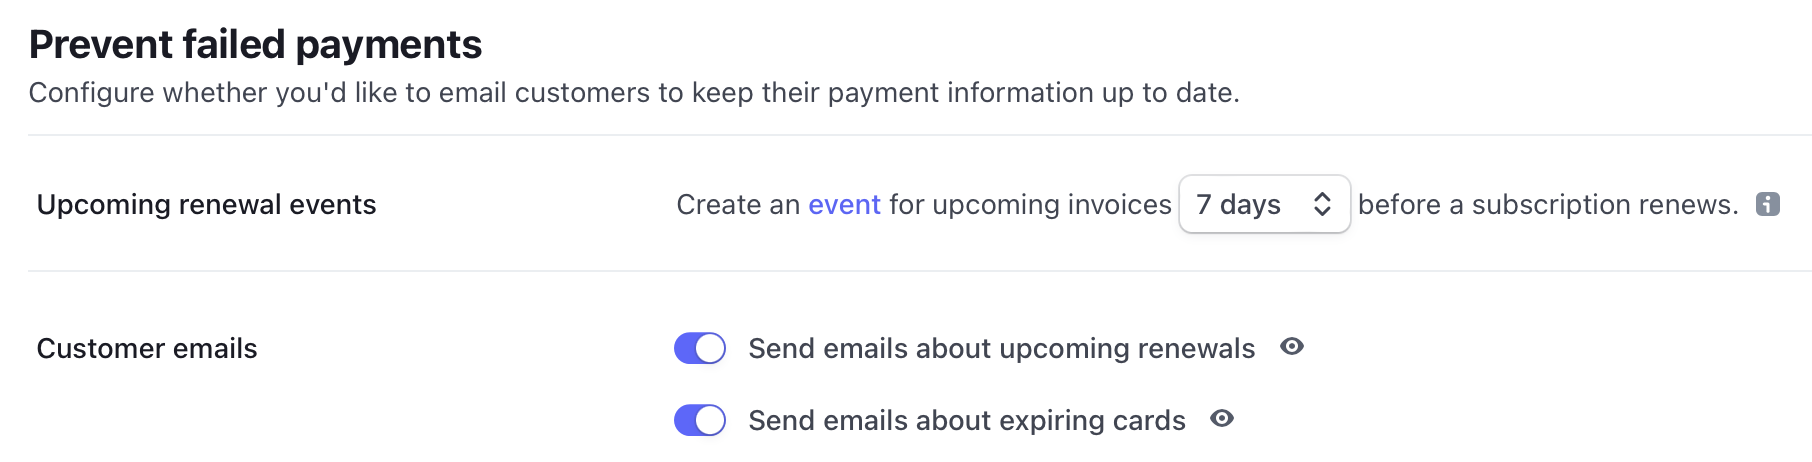 As part of your dunning process, Stripe enables you to configure whether you’d like to remind your customers to keep their payment details up-to-date.